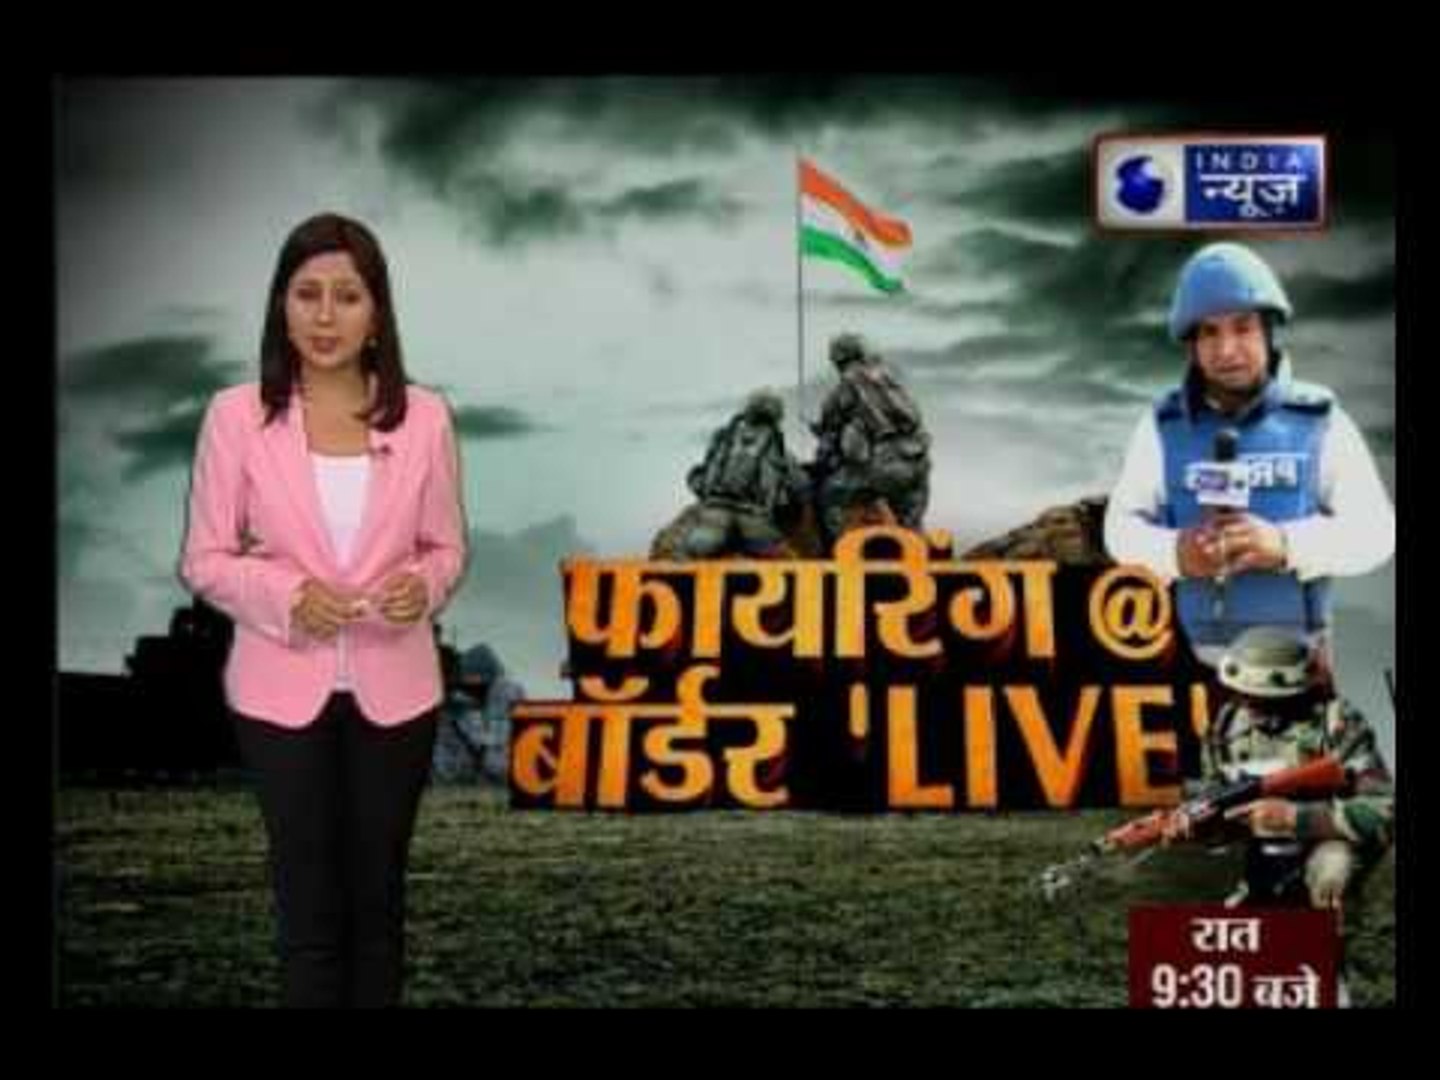 India News exclusive report from India-Pakistan international border